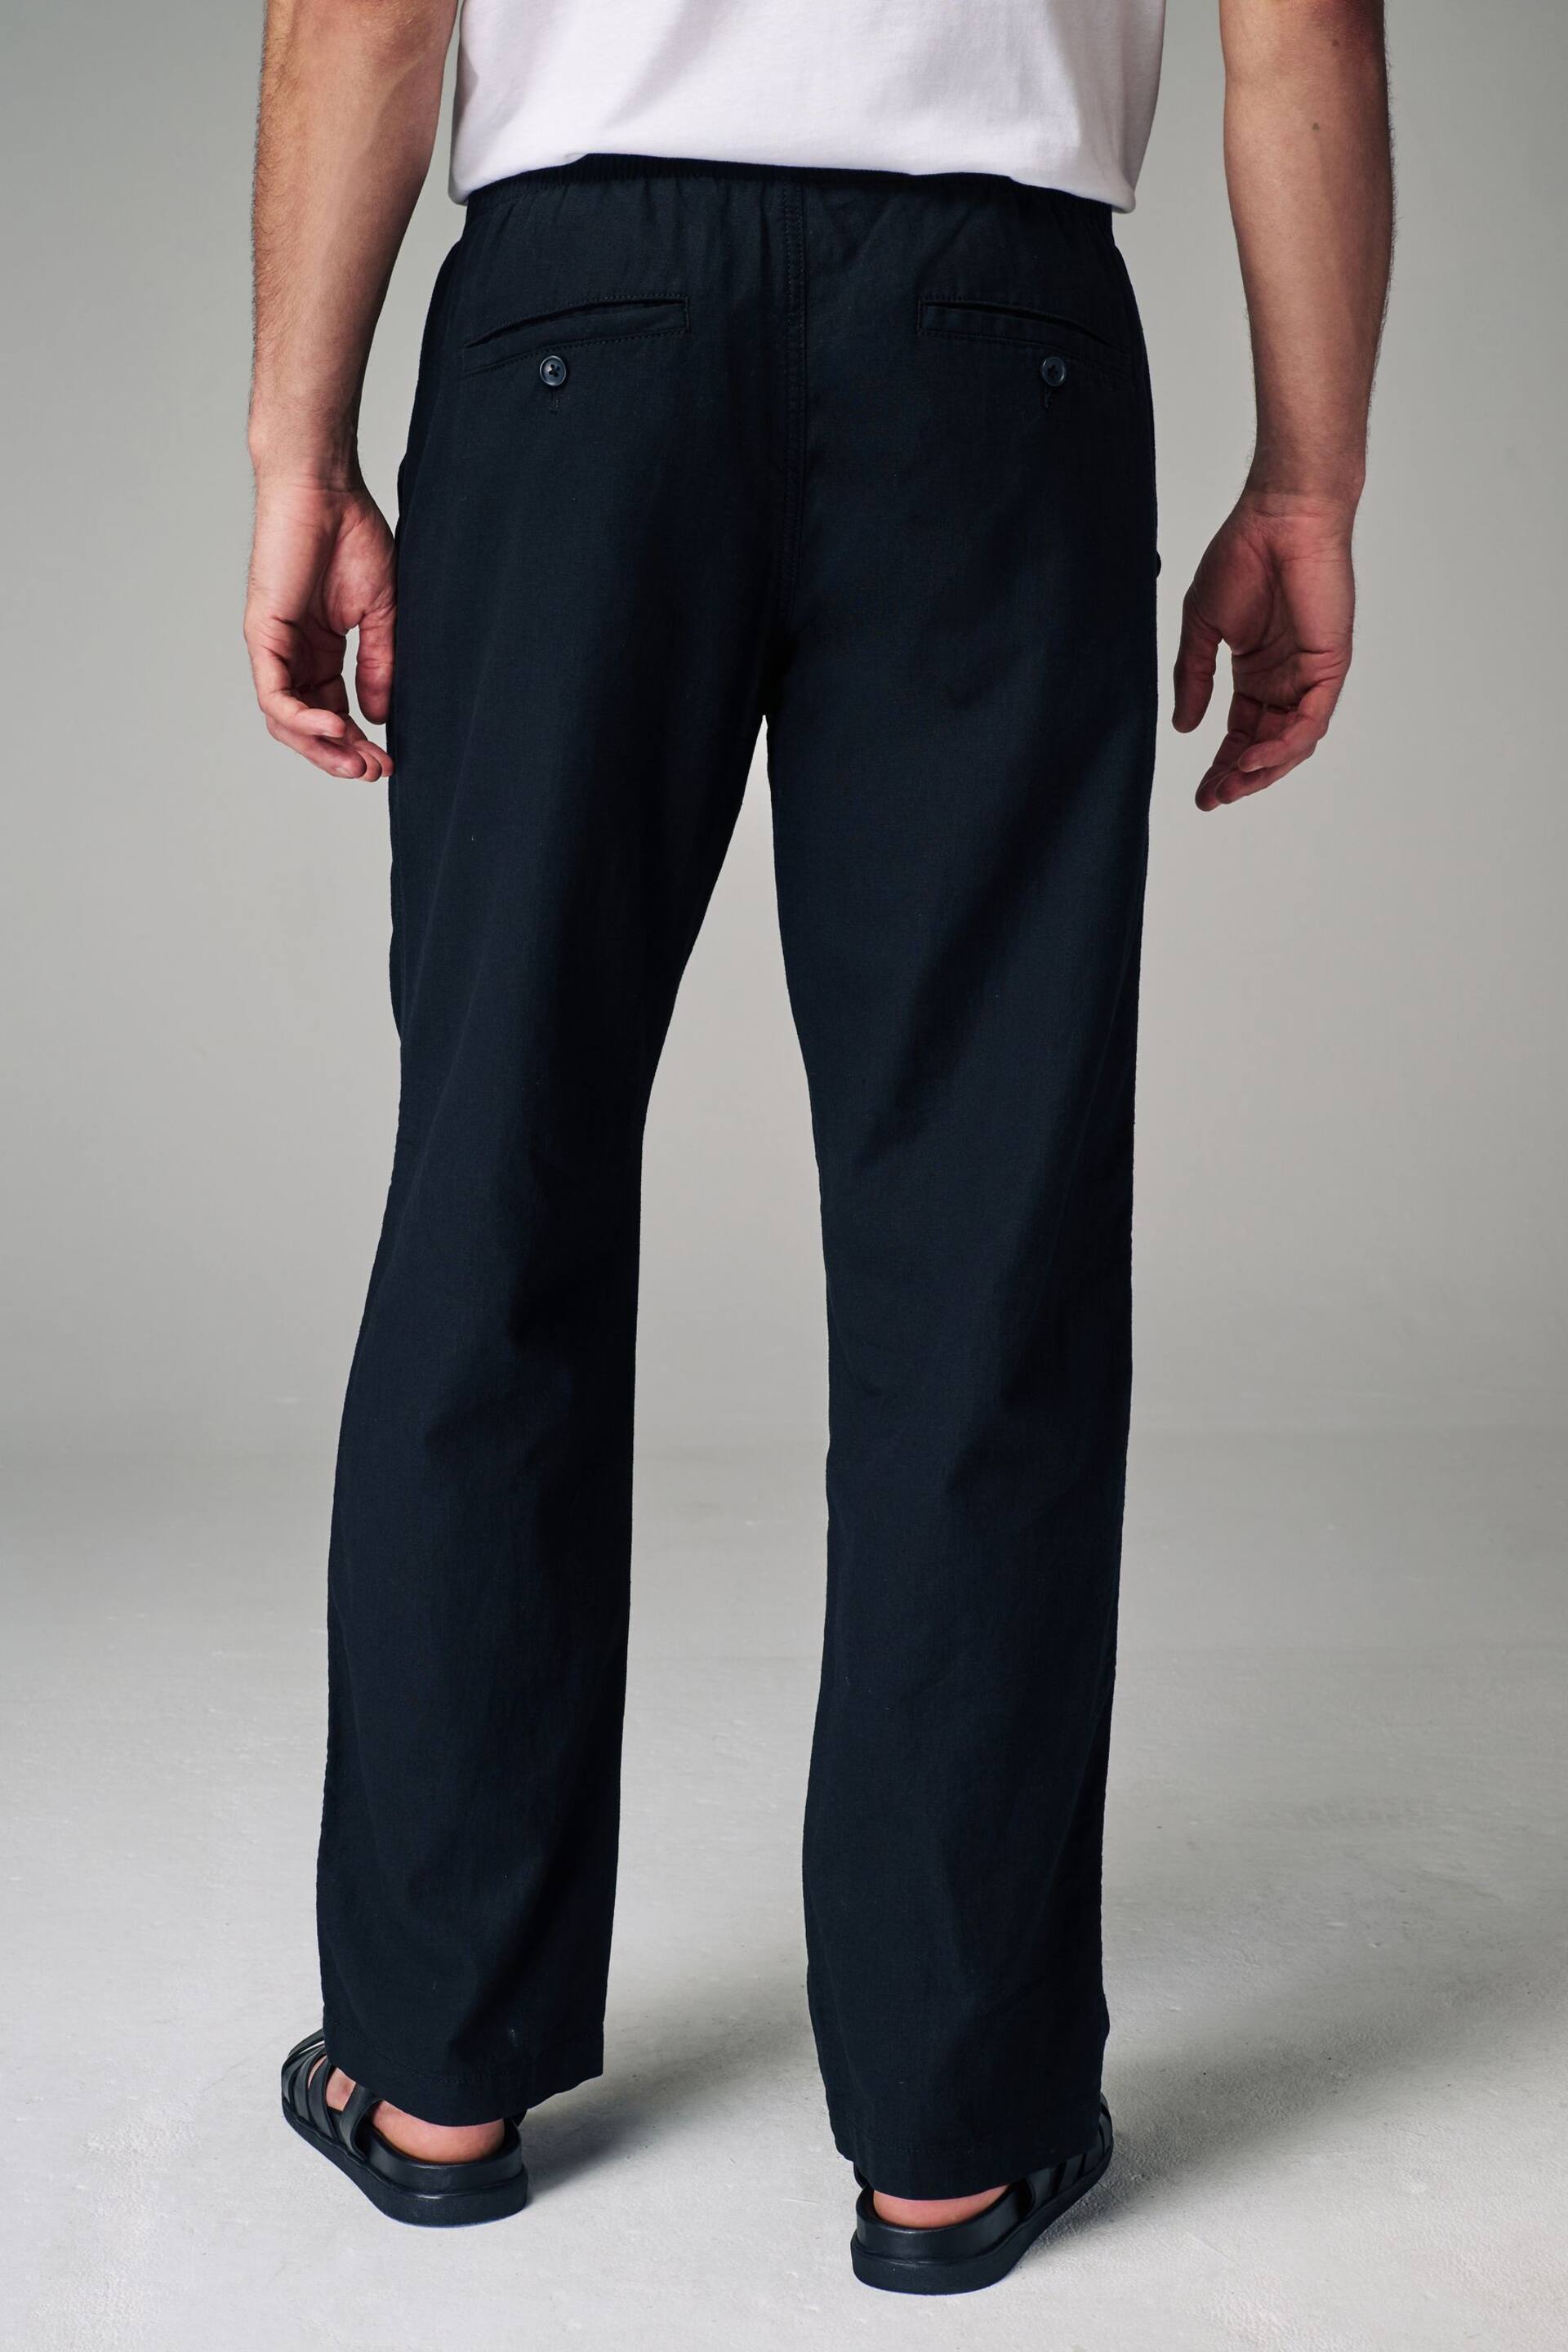 Black Relaxed Fit Linen Cotton Elasticated Drawstring Trousers - Image 4 of 10